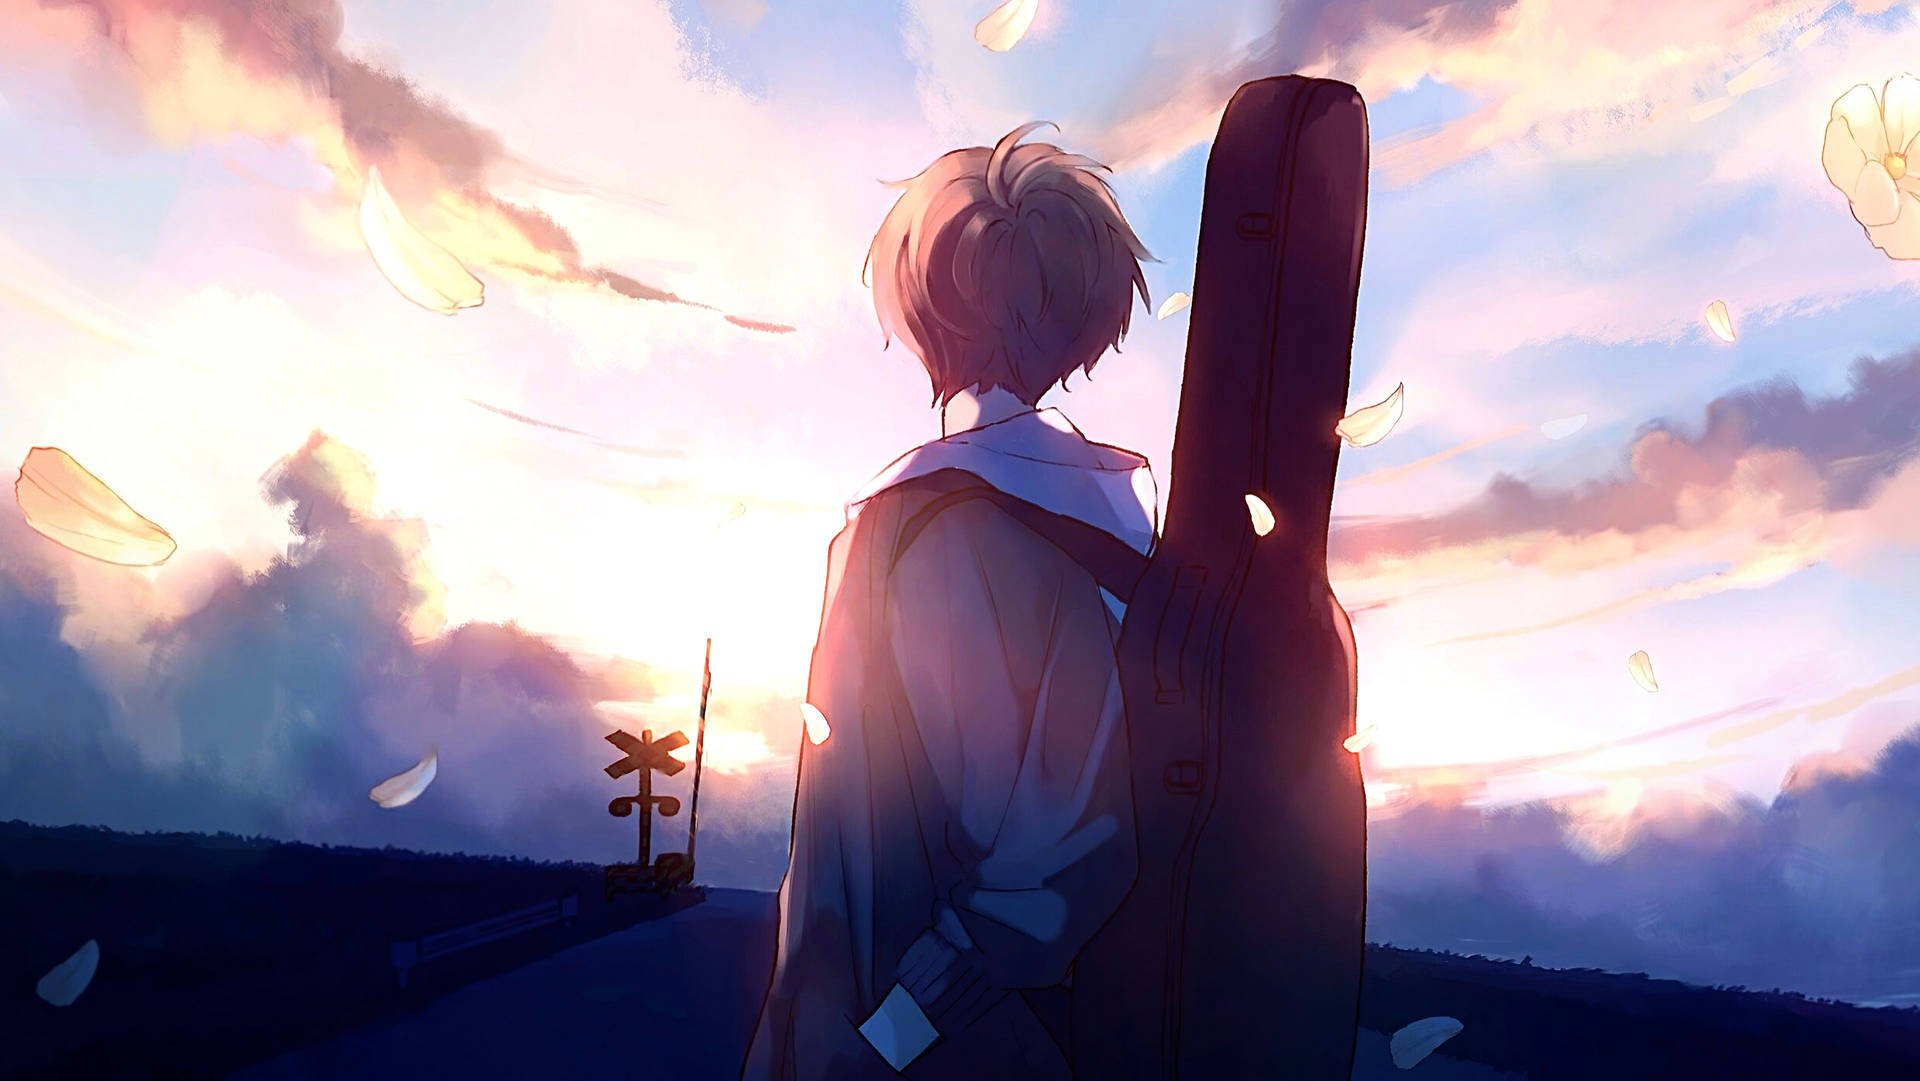 Aesthetic Anime Boy Sky And Guitar Background